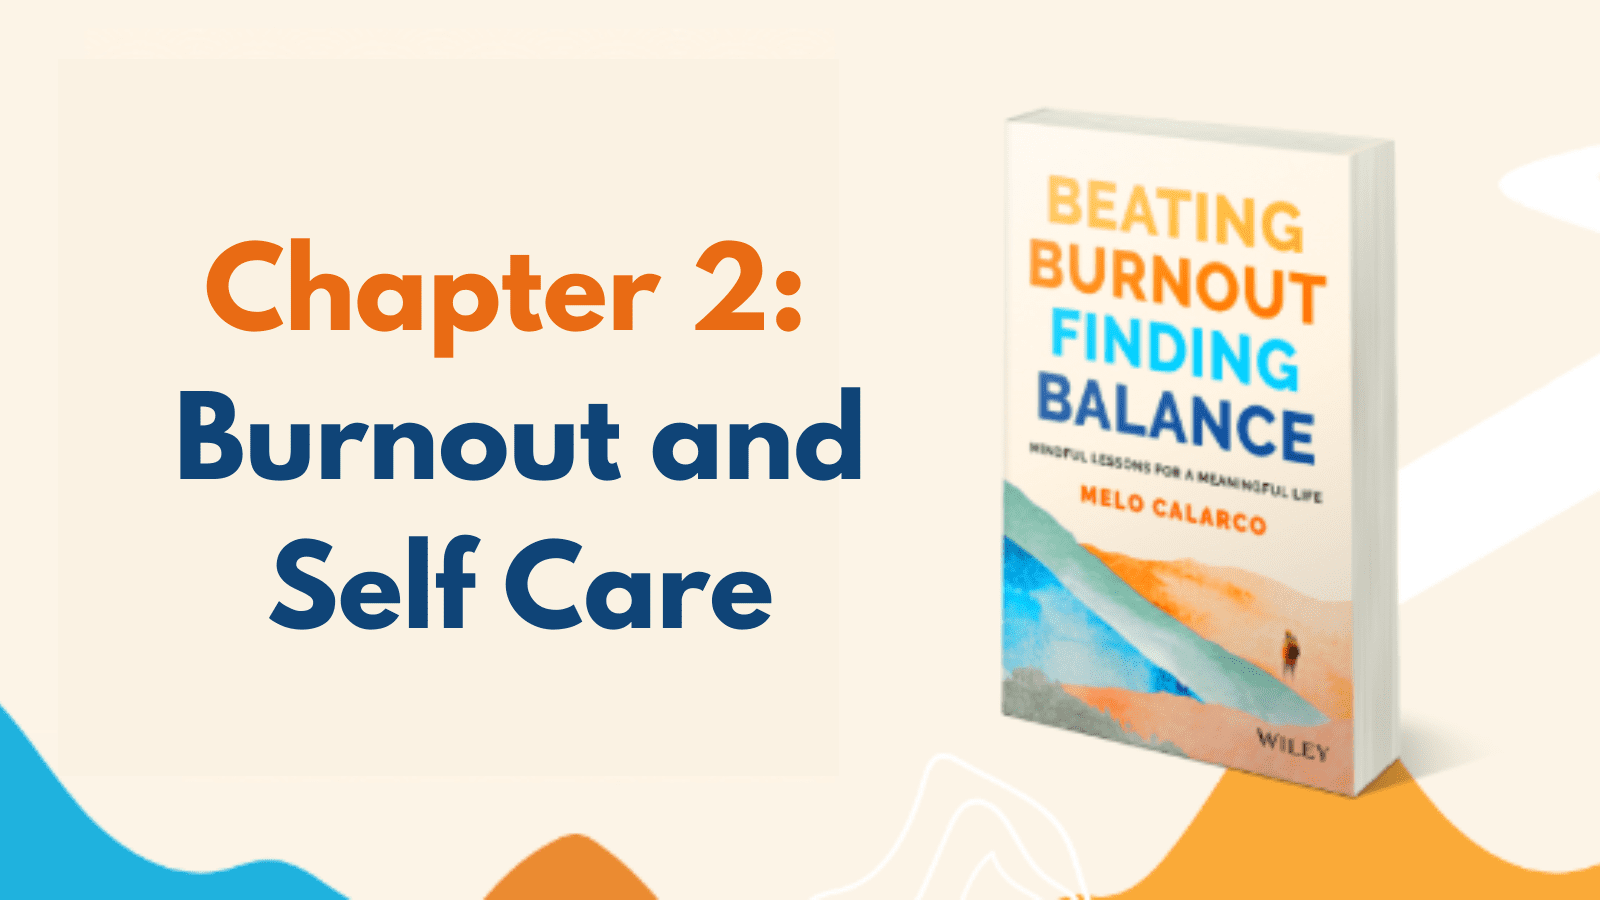 Chapter 2: Burnout and Self Care